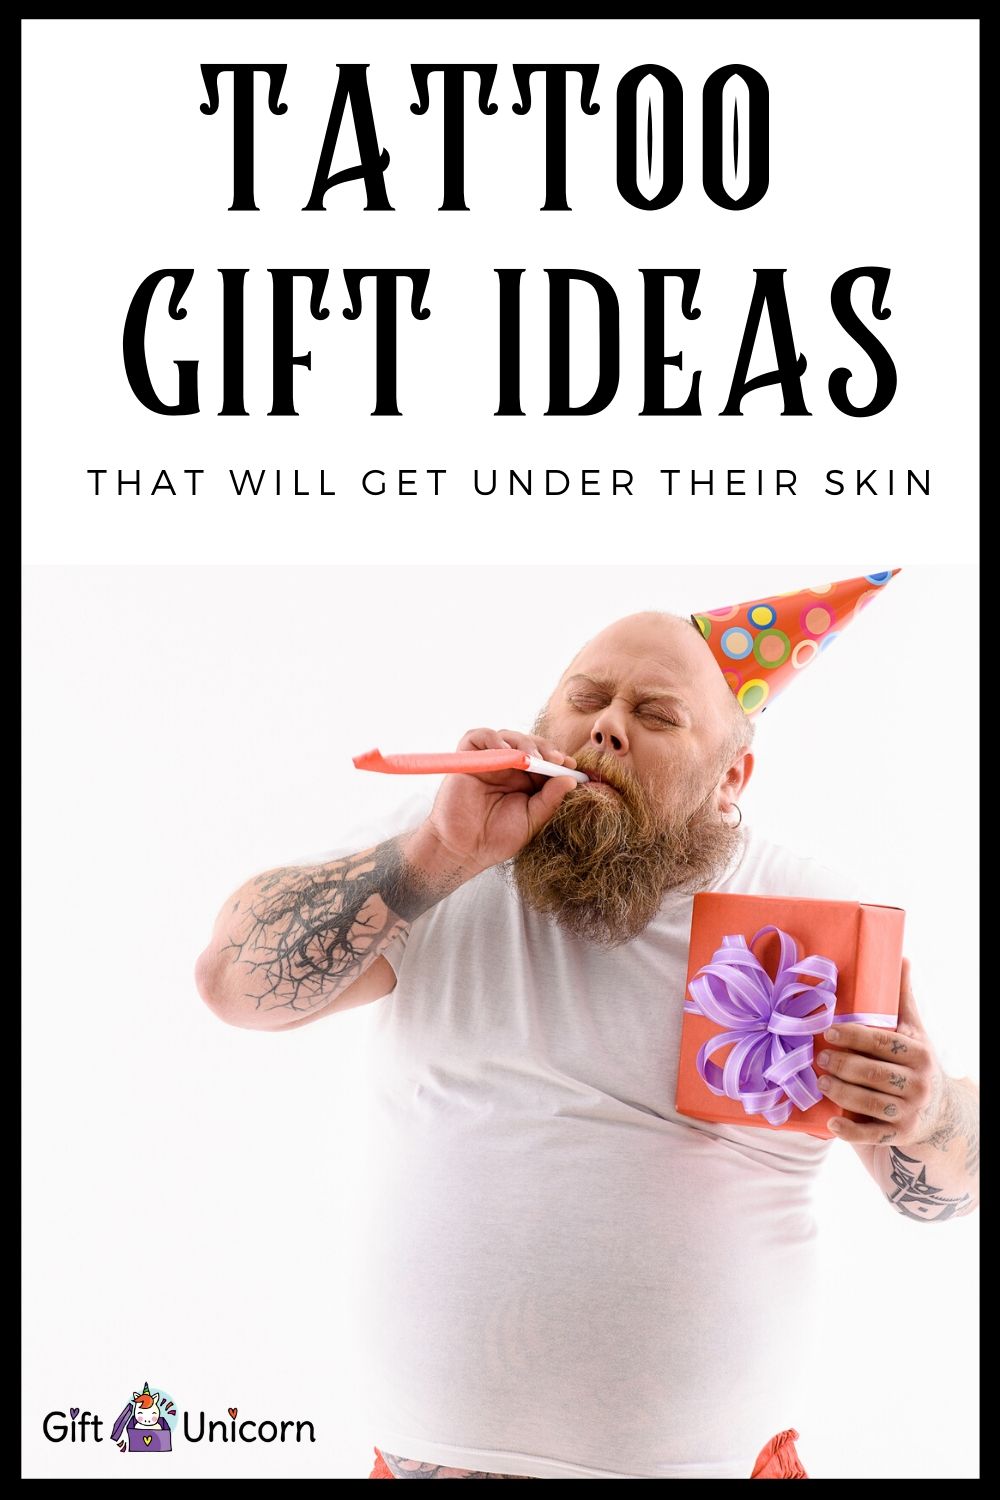 39 Tattoo Gifts That Will Get Under Their Skin - pinterest pin image